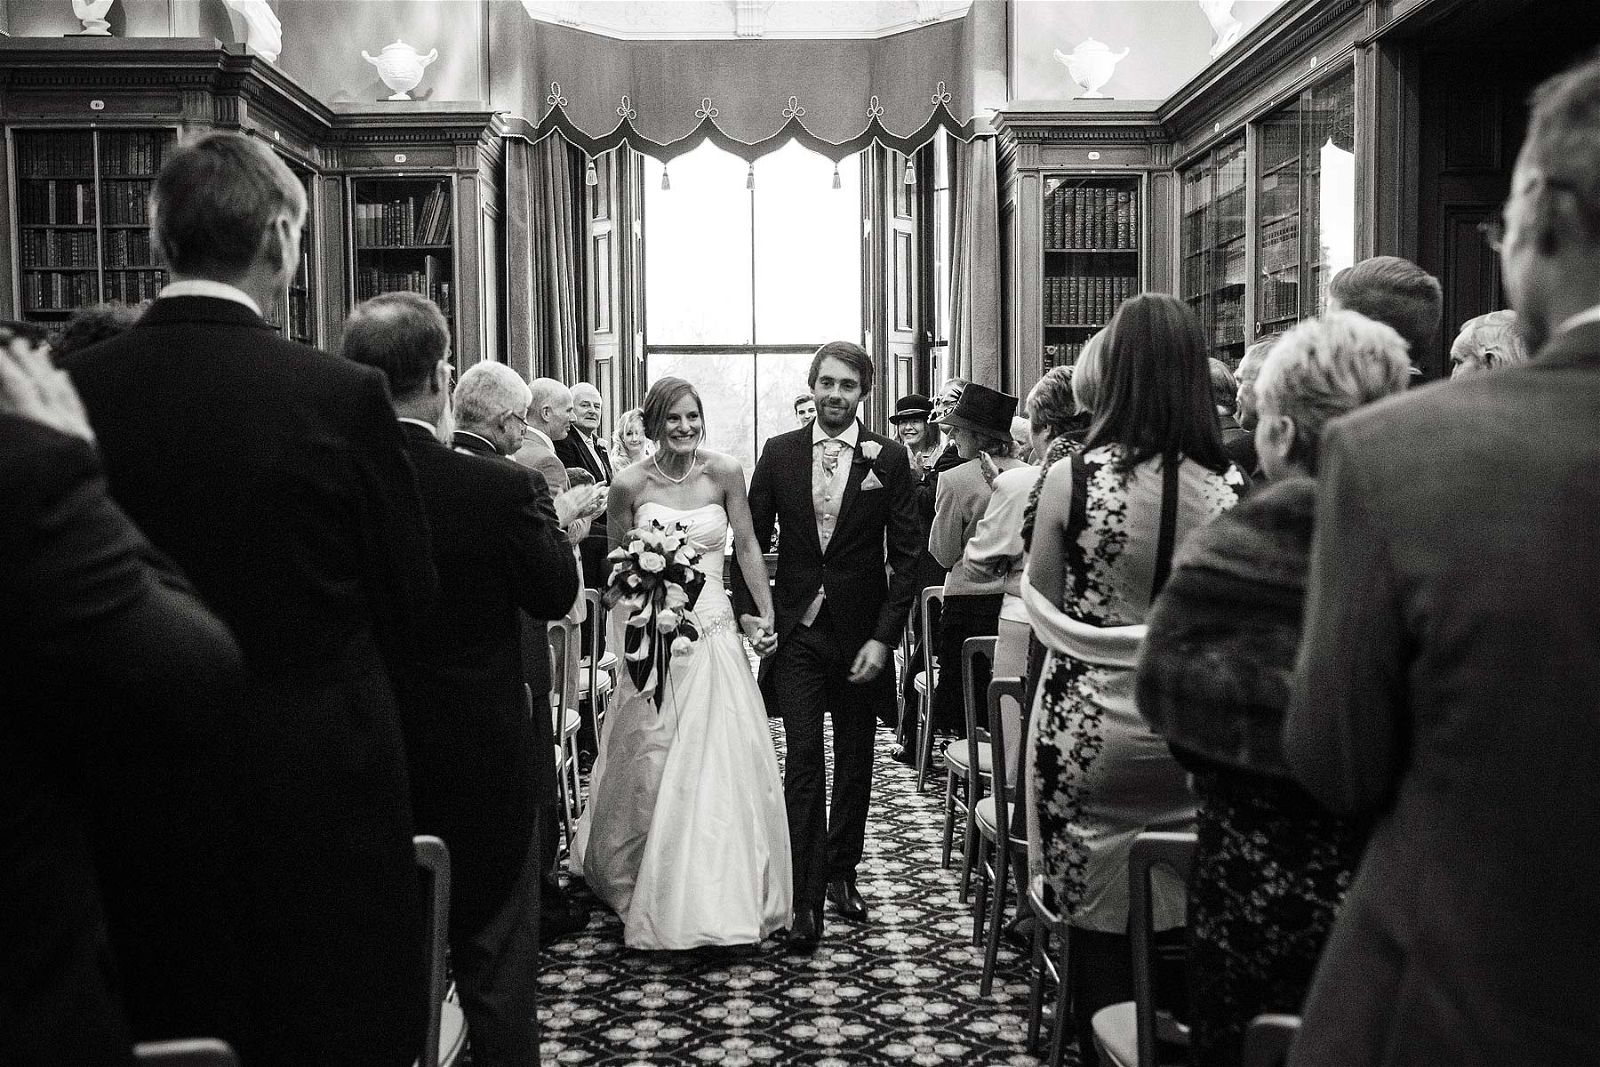 Reportage photography captures the emotion and feeling during the vow ceremony at Sandon Hall in Stafford by Documentary Wedding Photographer Stuart James